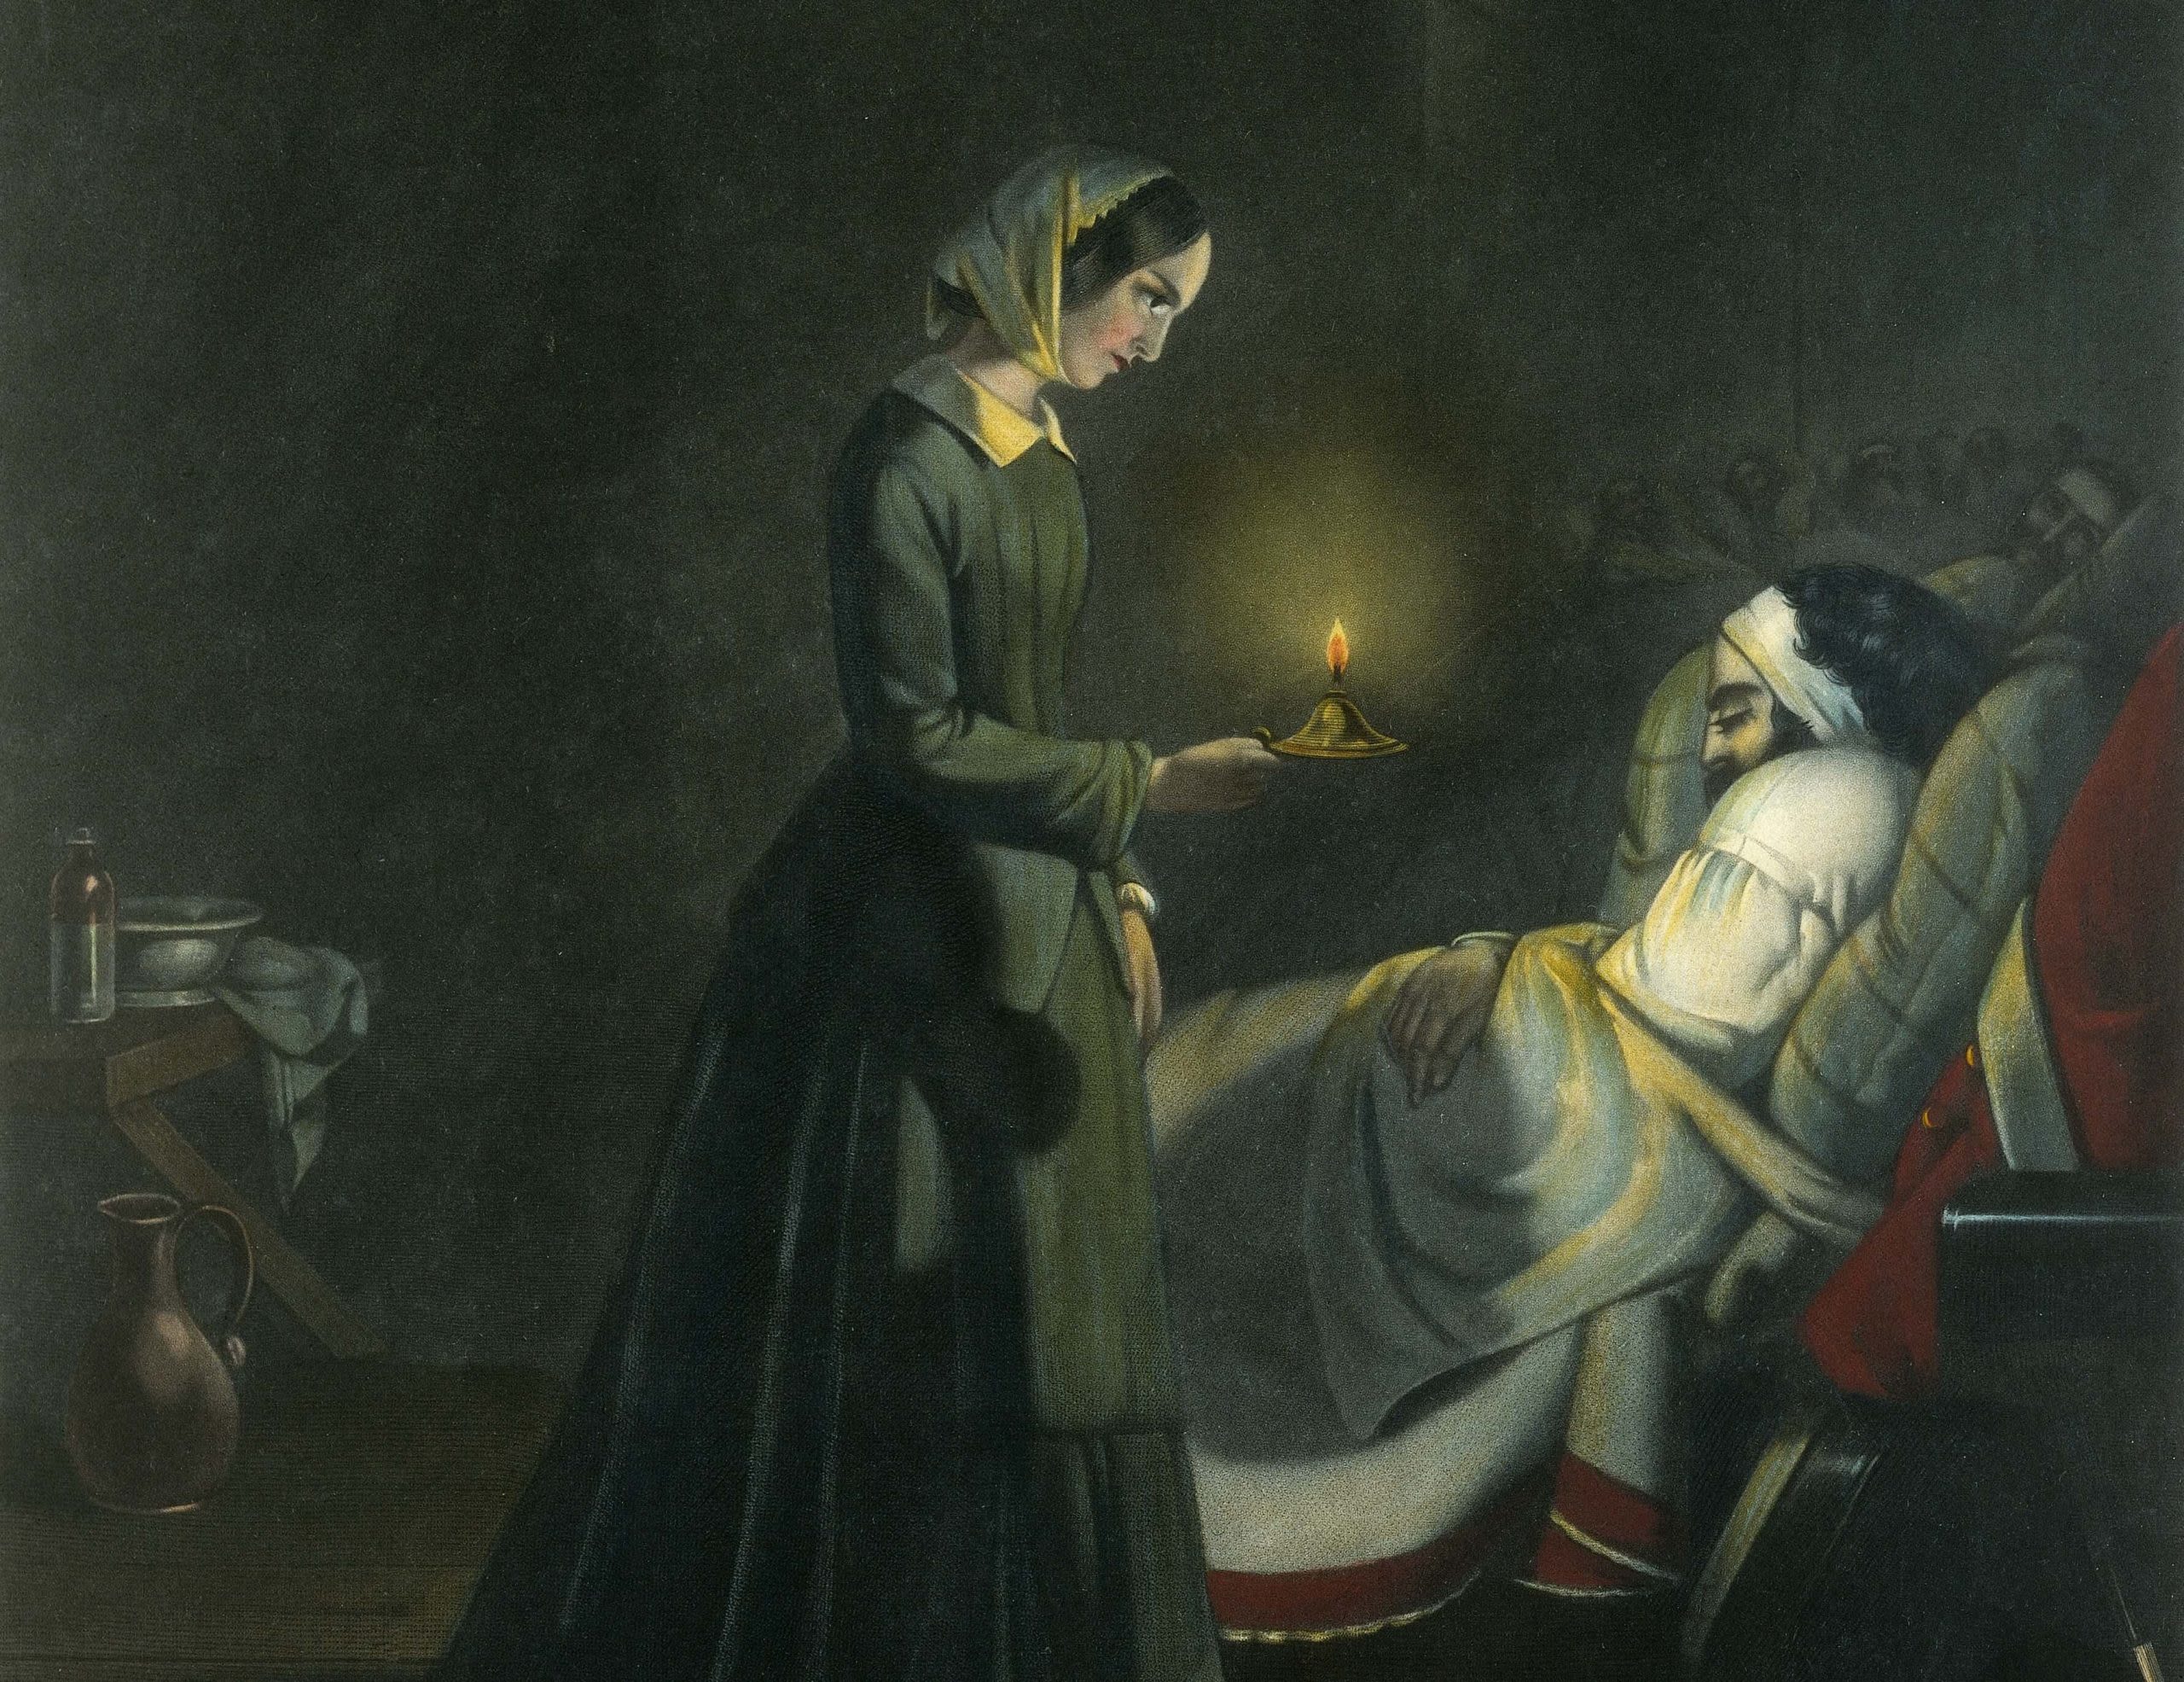 illustration showing Florence Nightingale holding a lamp, alongside a bed where a patient lies